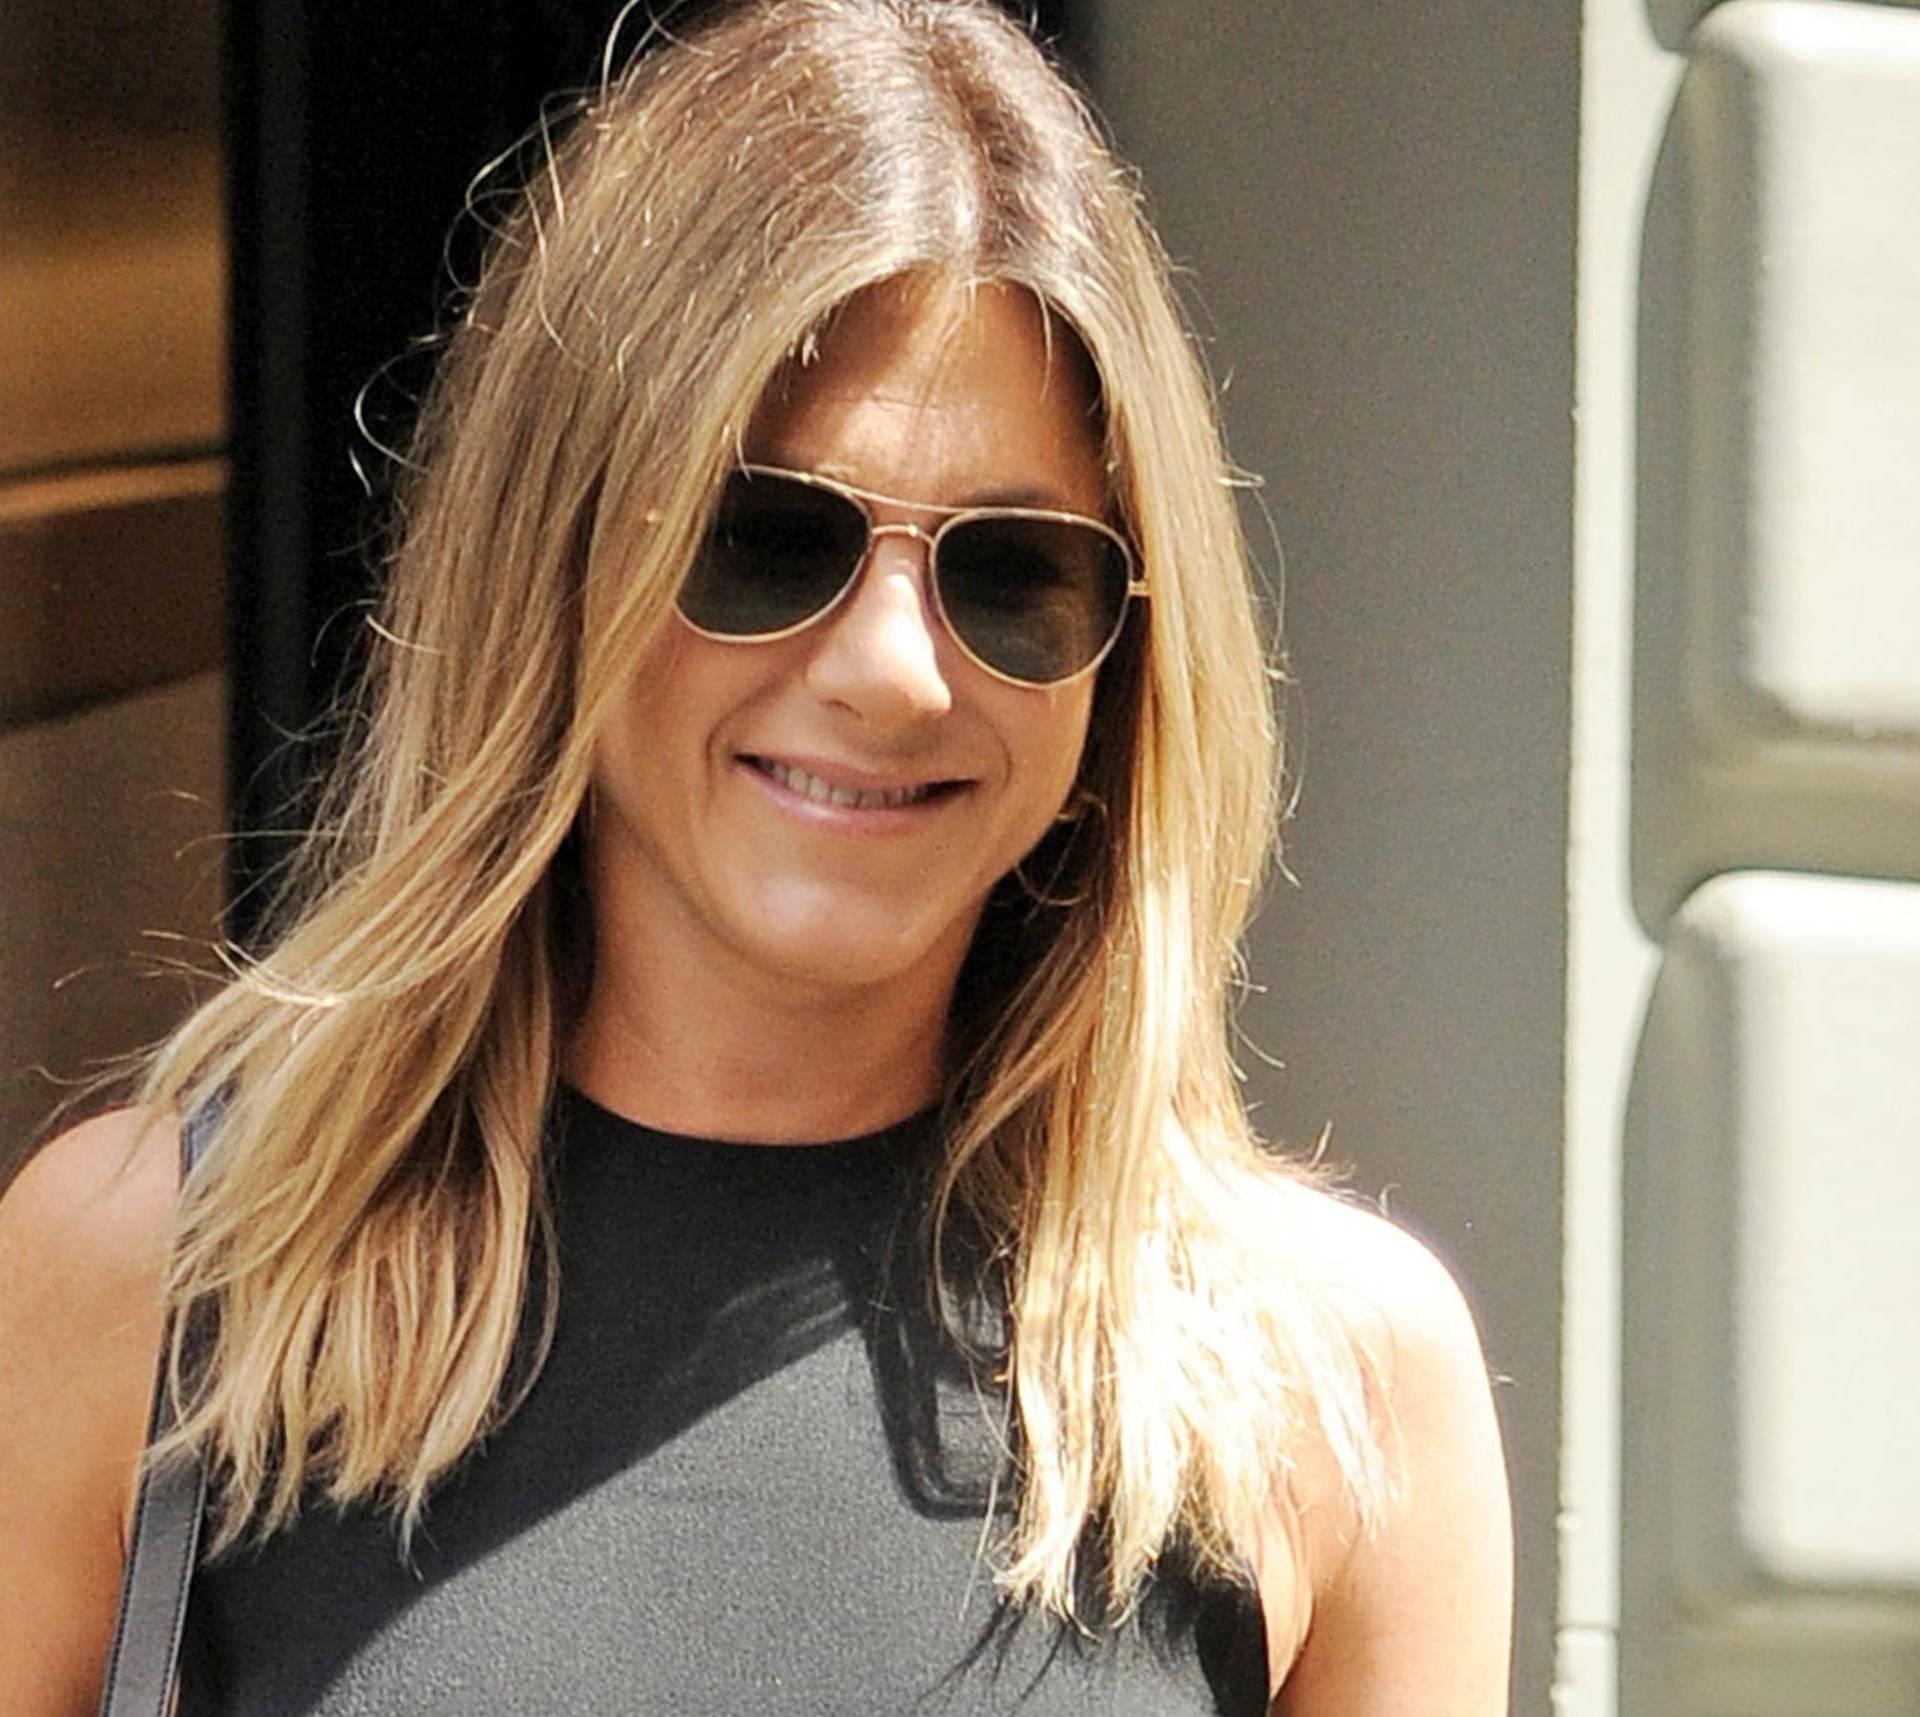 A braless Jennifer Aniston is all smiles after lunch at Le Bilboquet in New York